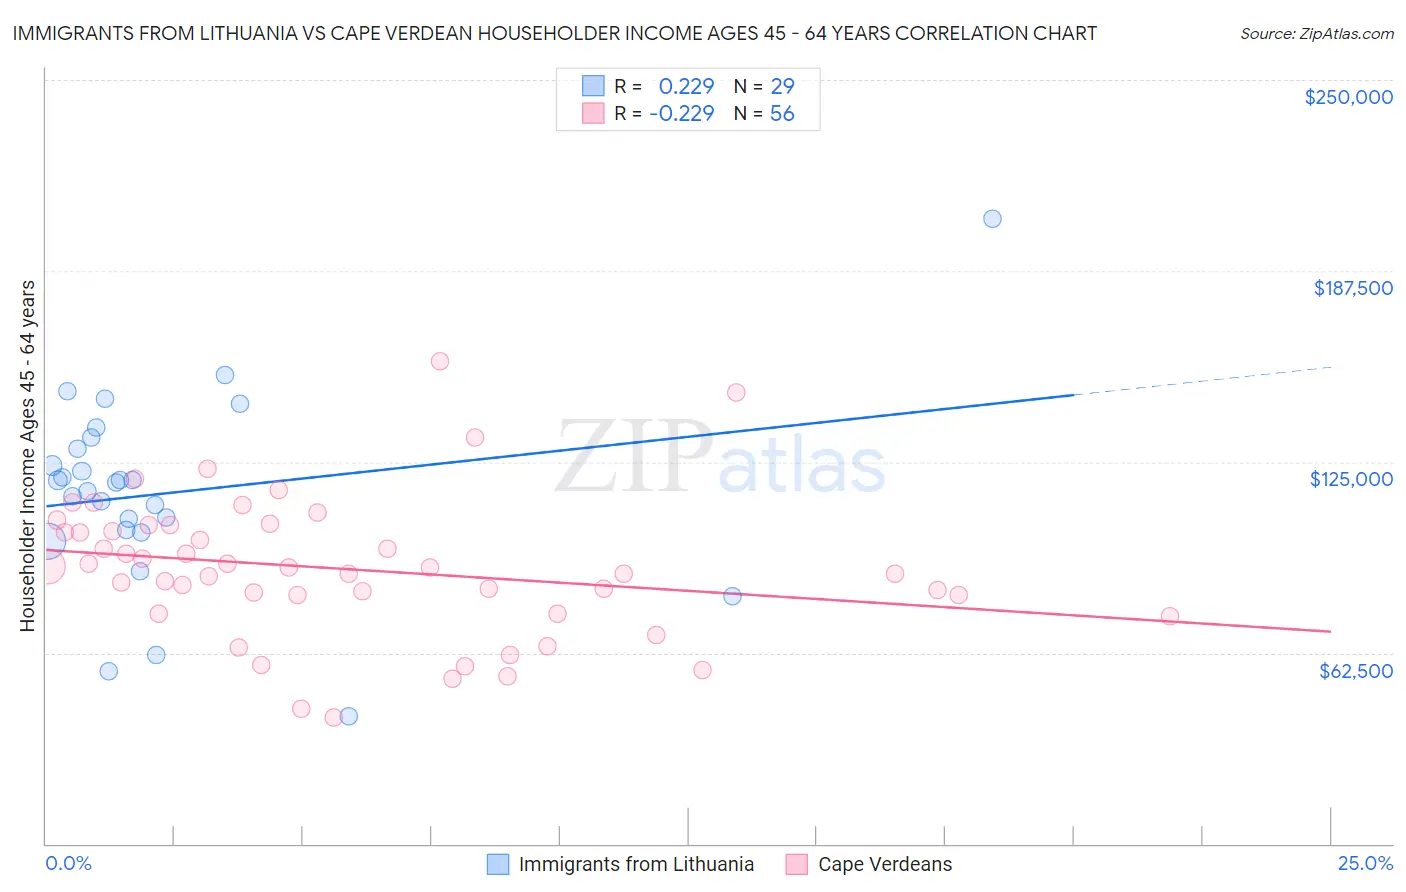 Immigrants from Lithuania vs Cape Verdean Householder Income Ages 45 - 64 years